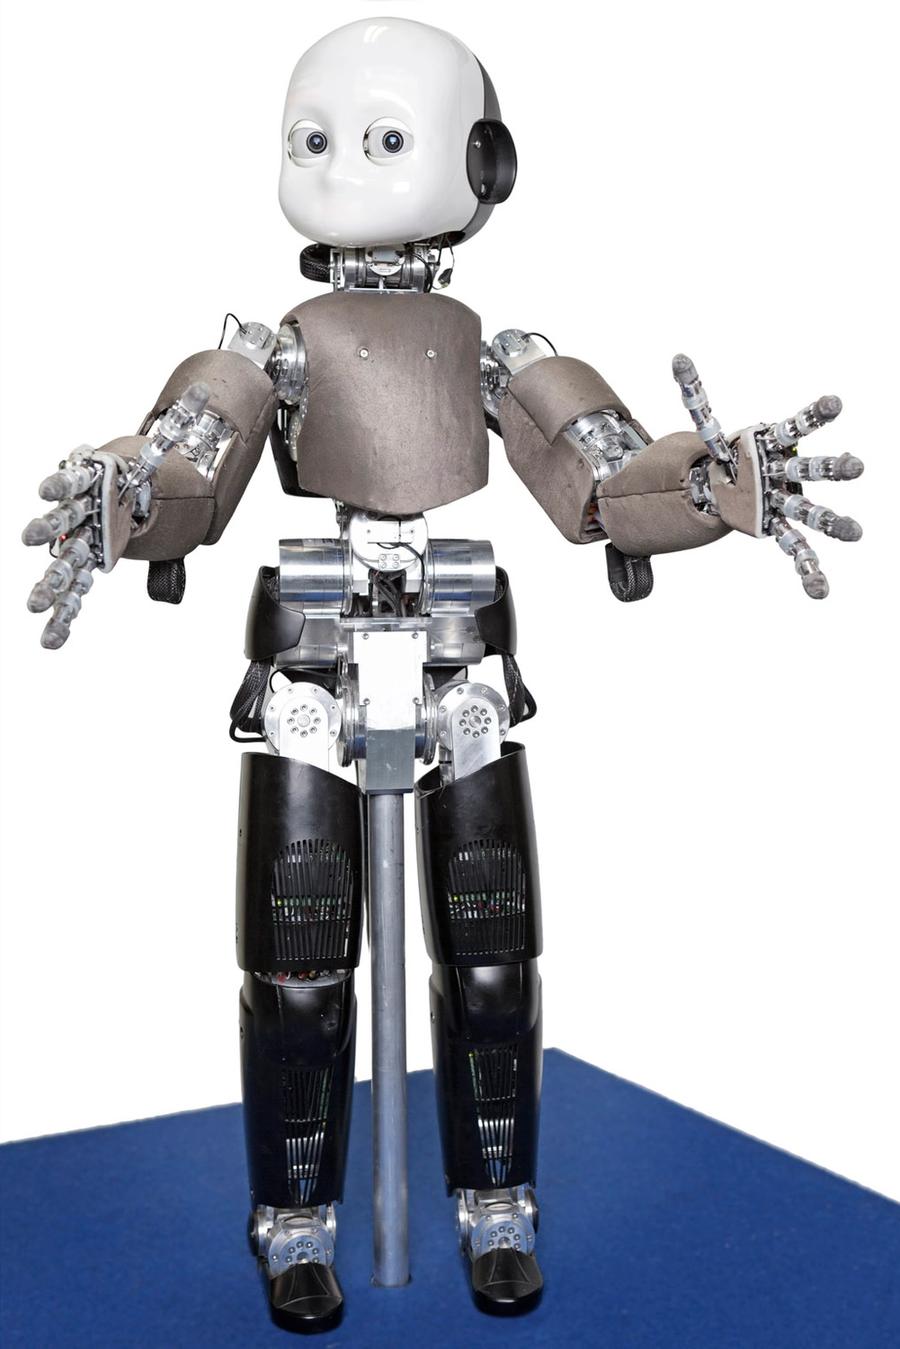 A child-like humanoid robot holds its jointed hands out towards the camera.